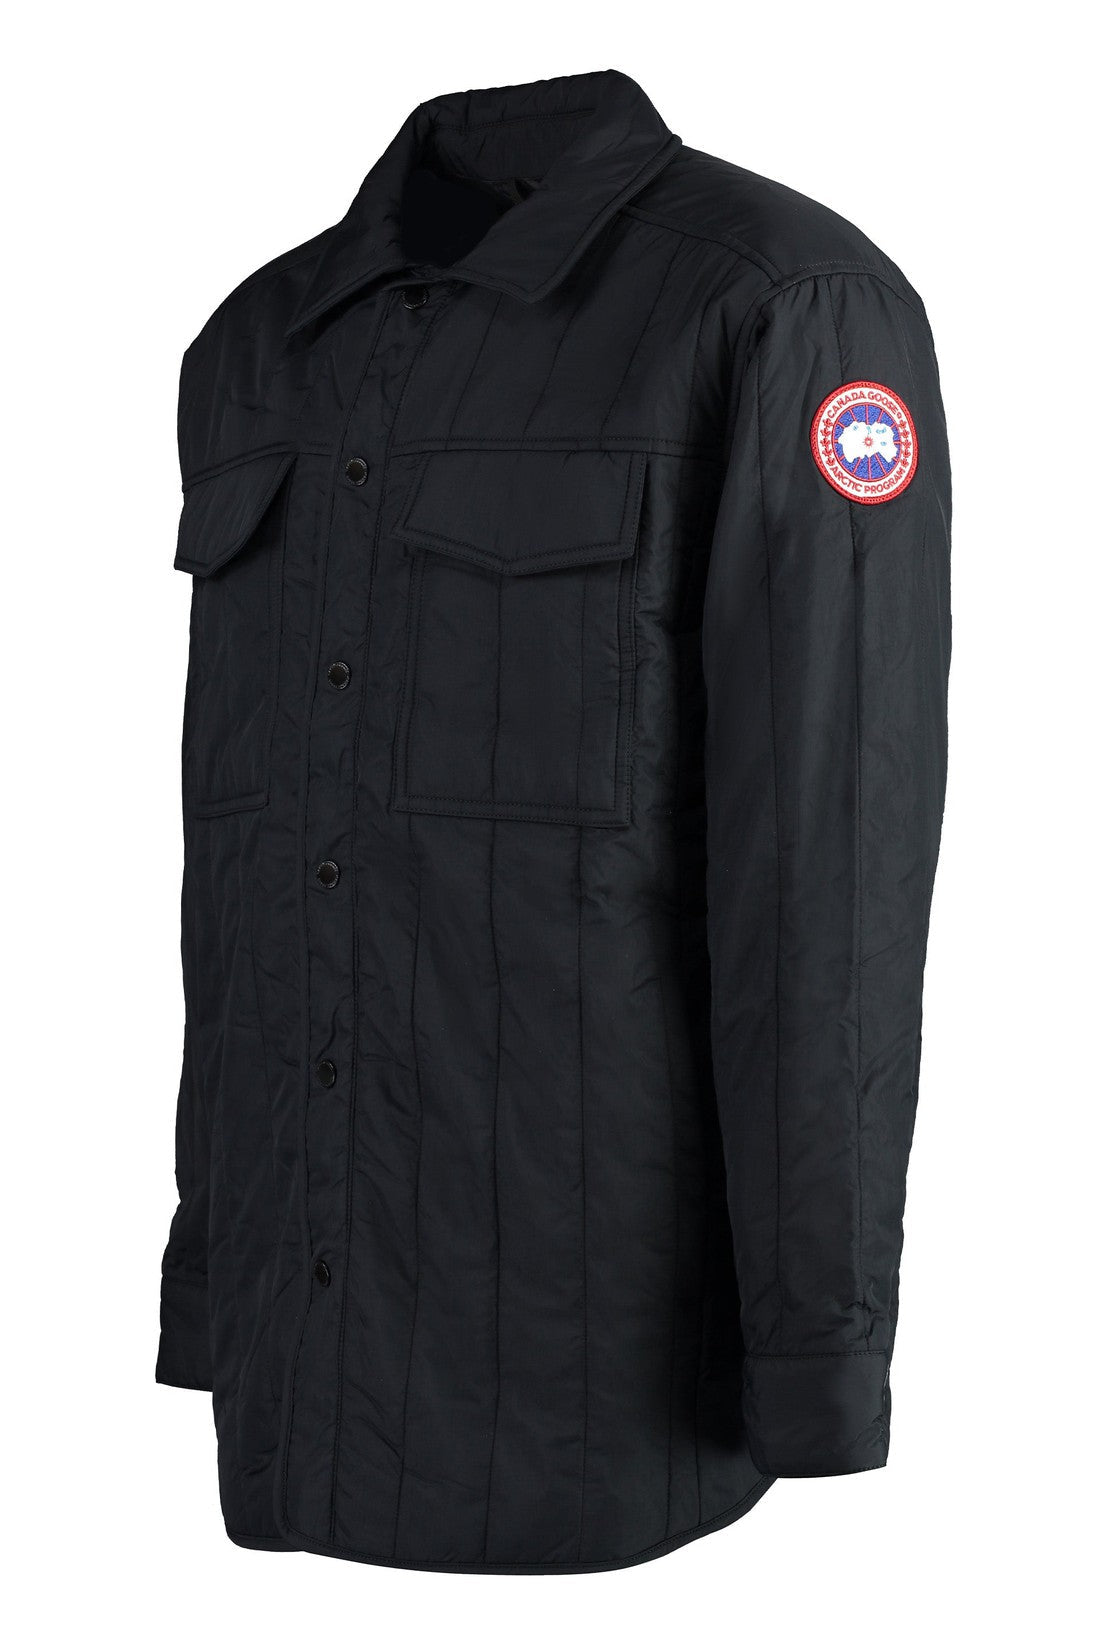 Canada Goose-OUTLET-SALE-Carlyle technical fabric overshirt-ARCHIVIST